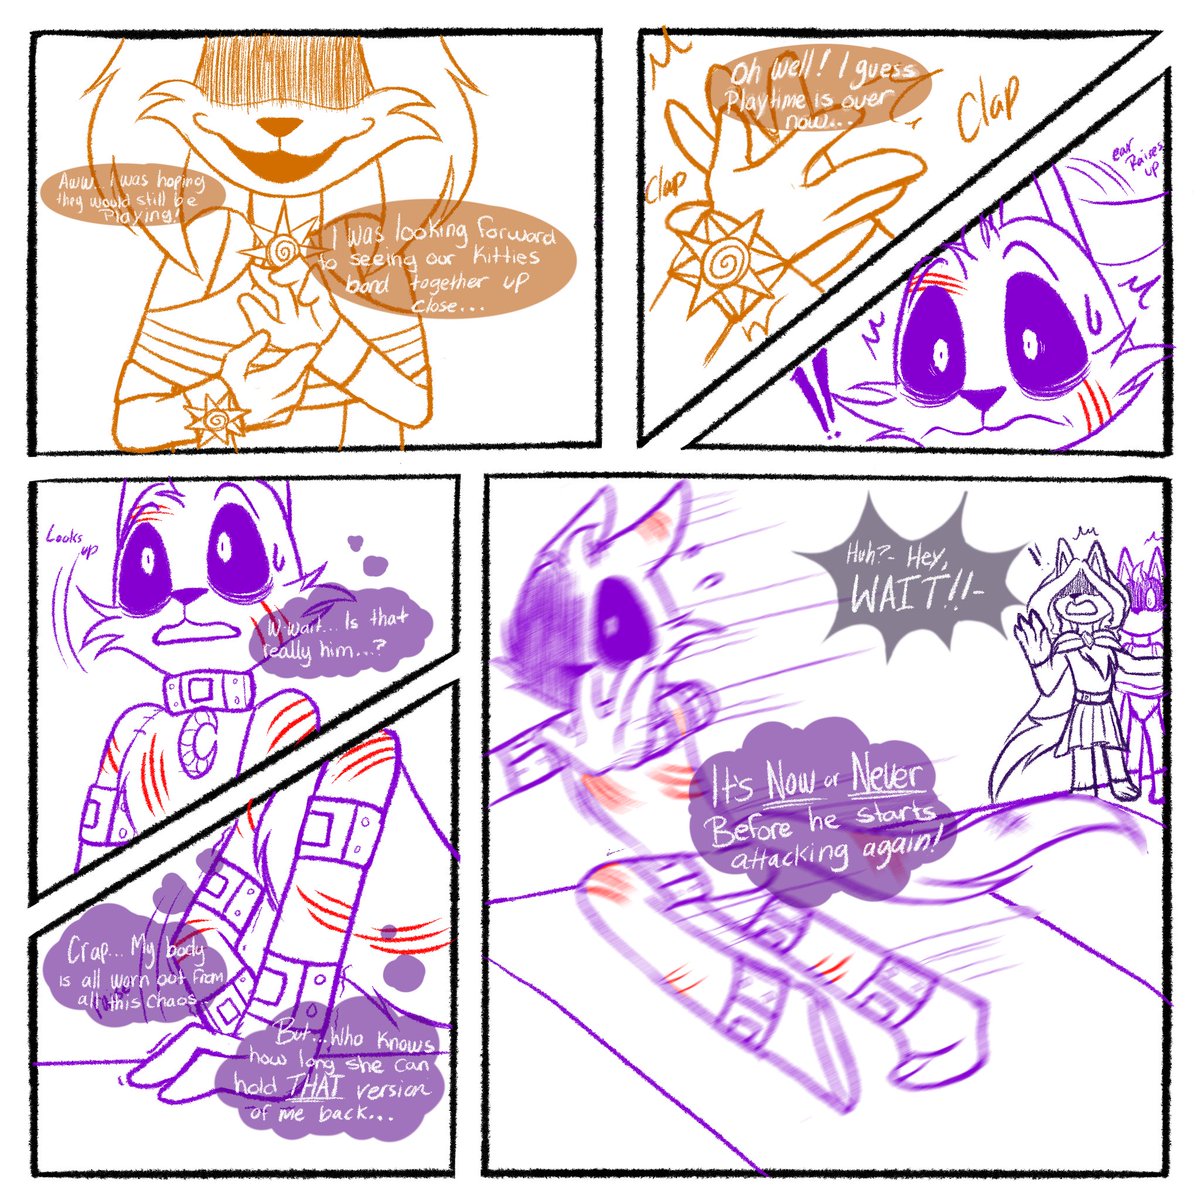 And It looks like the Heretic Has made a run for it! Though he may have found another protection source when he did so aswell 🫢 

(2 more Pages to go..🤫) 

#PoppyPlaytimeChapter3 #SmilingsCrittersAU #SmilingsCritters #SolarEclipseAu #LunarEclipseAu #Catnap #Dogday